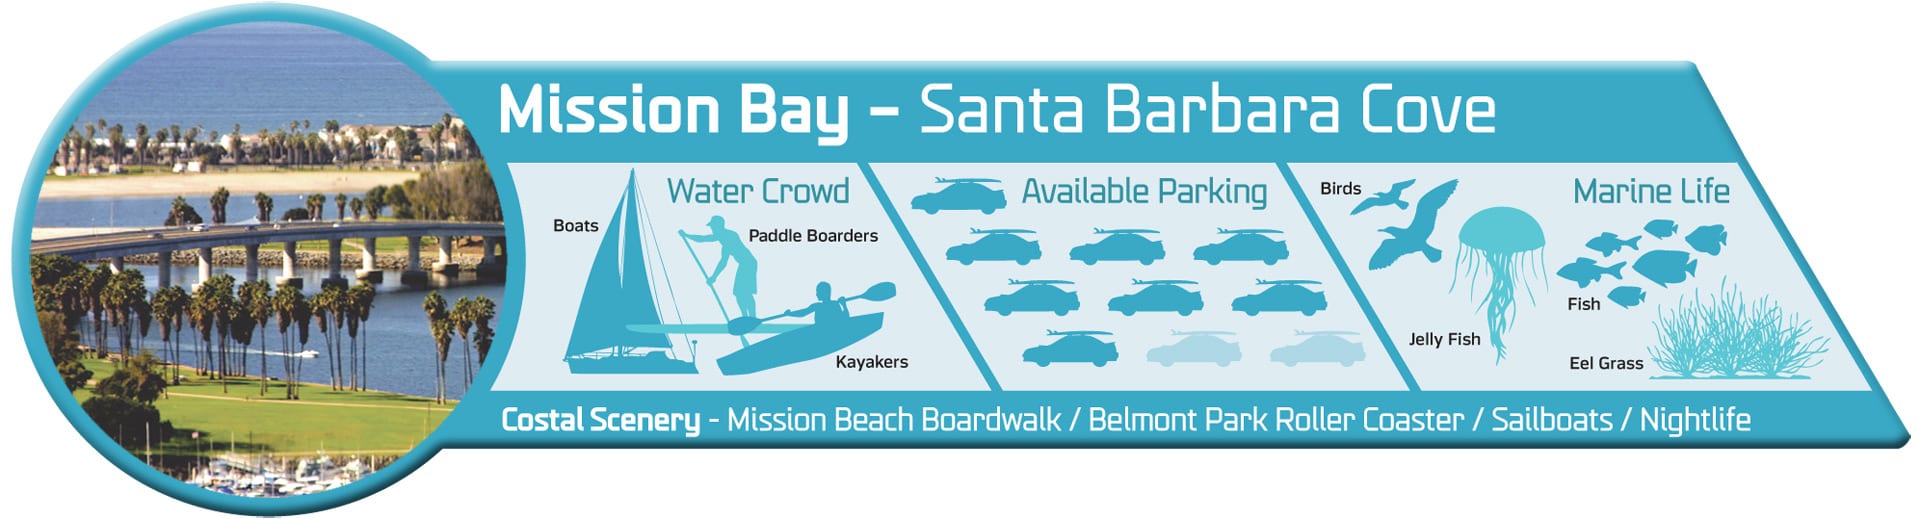 Mission Bay Info Graphic